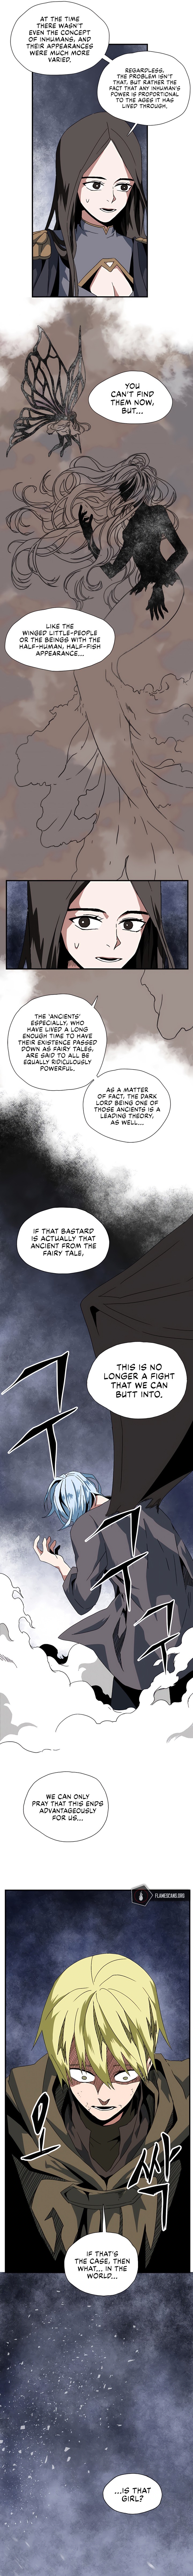 One Step For The Dark Lord Chapter 2 Page 25